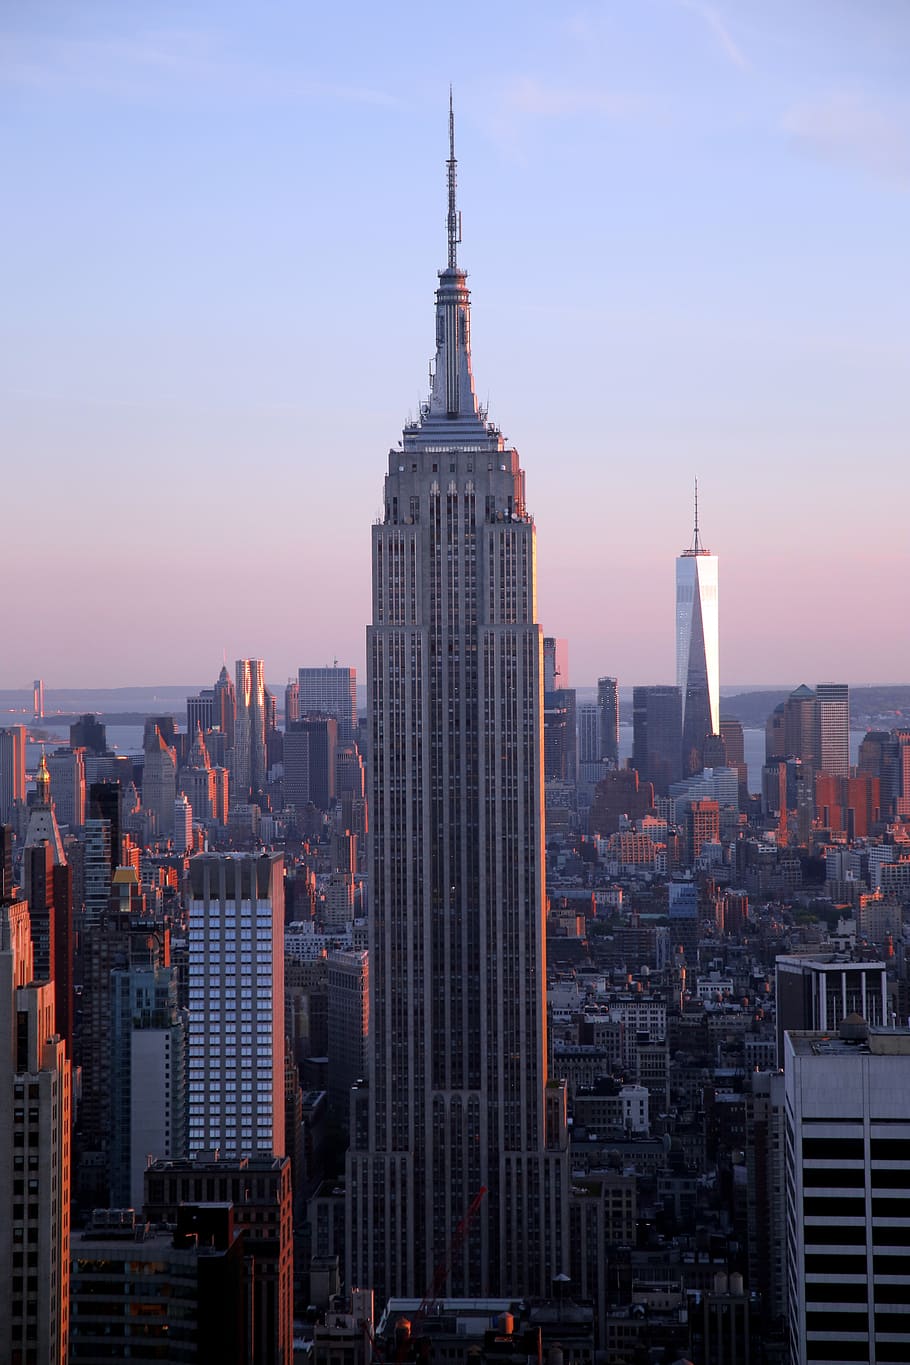 new york, city, skyscraper, united states, buildings, nyc, architecture, manhattan, skyline, empire state building